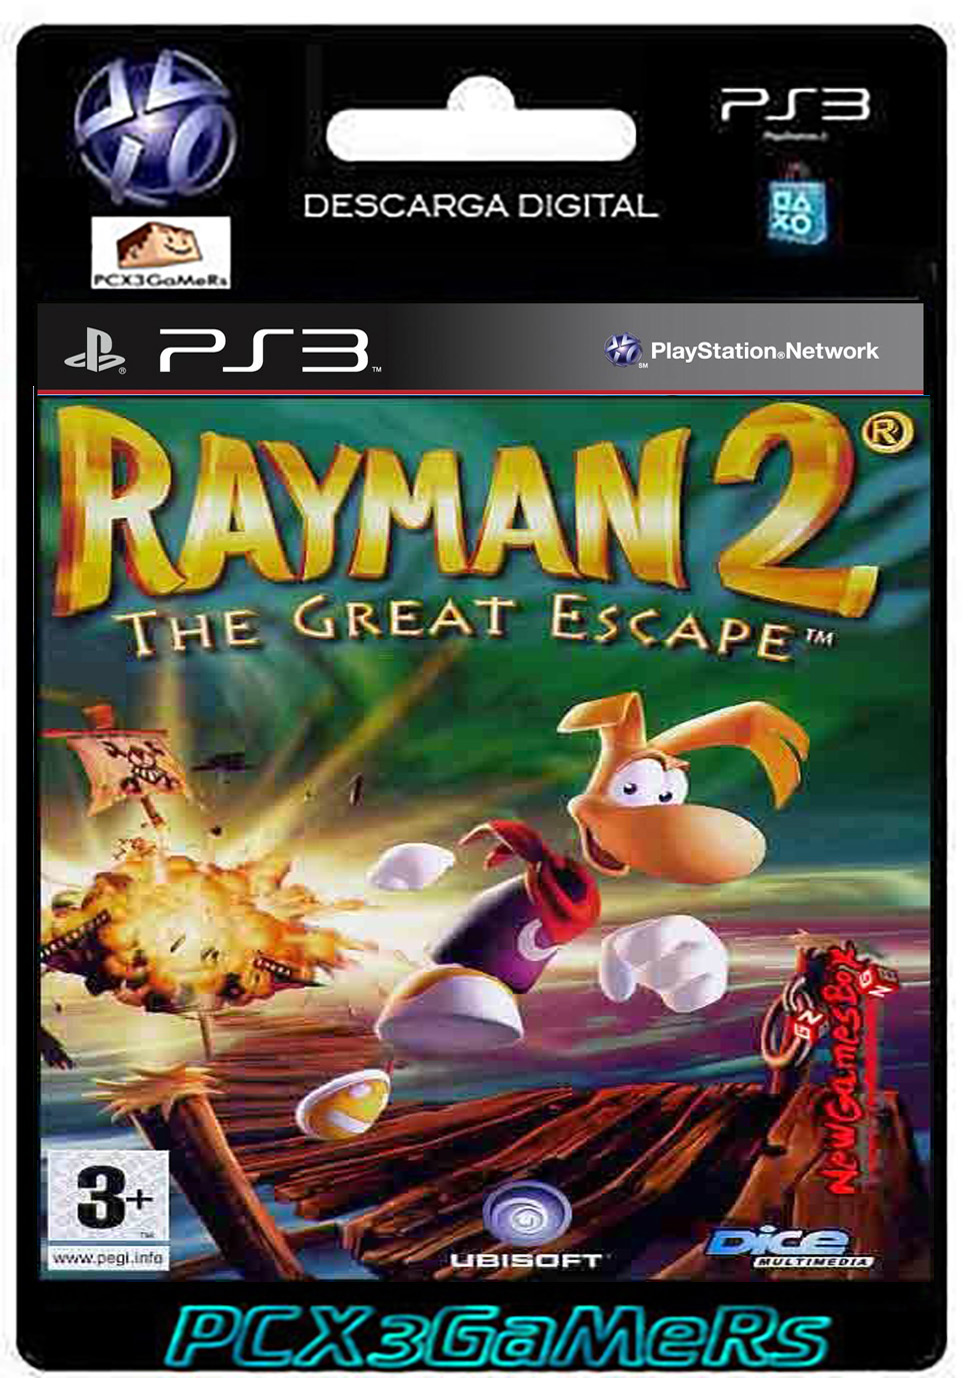 PS3 Rayman 2: The Great Escape®